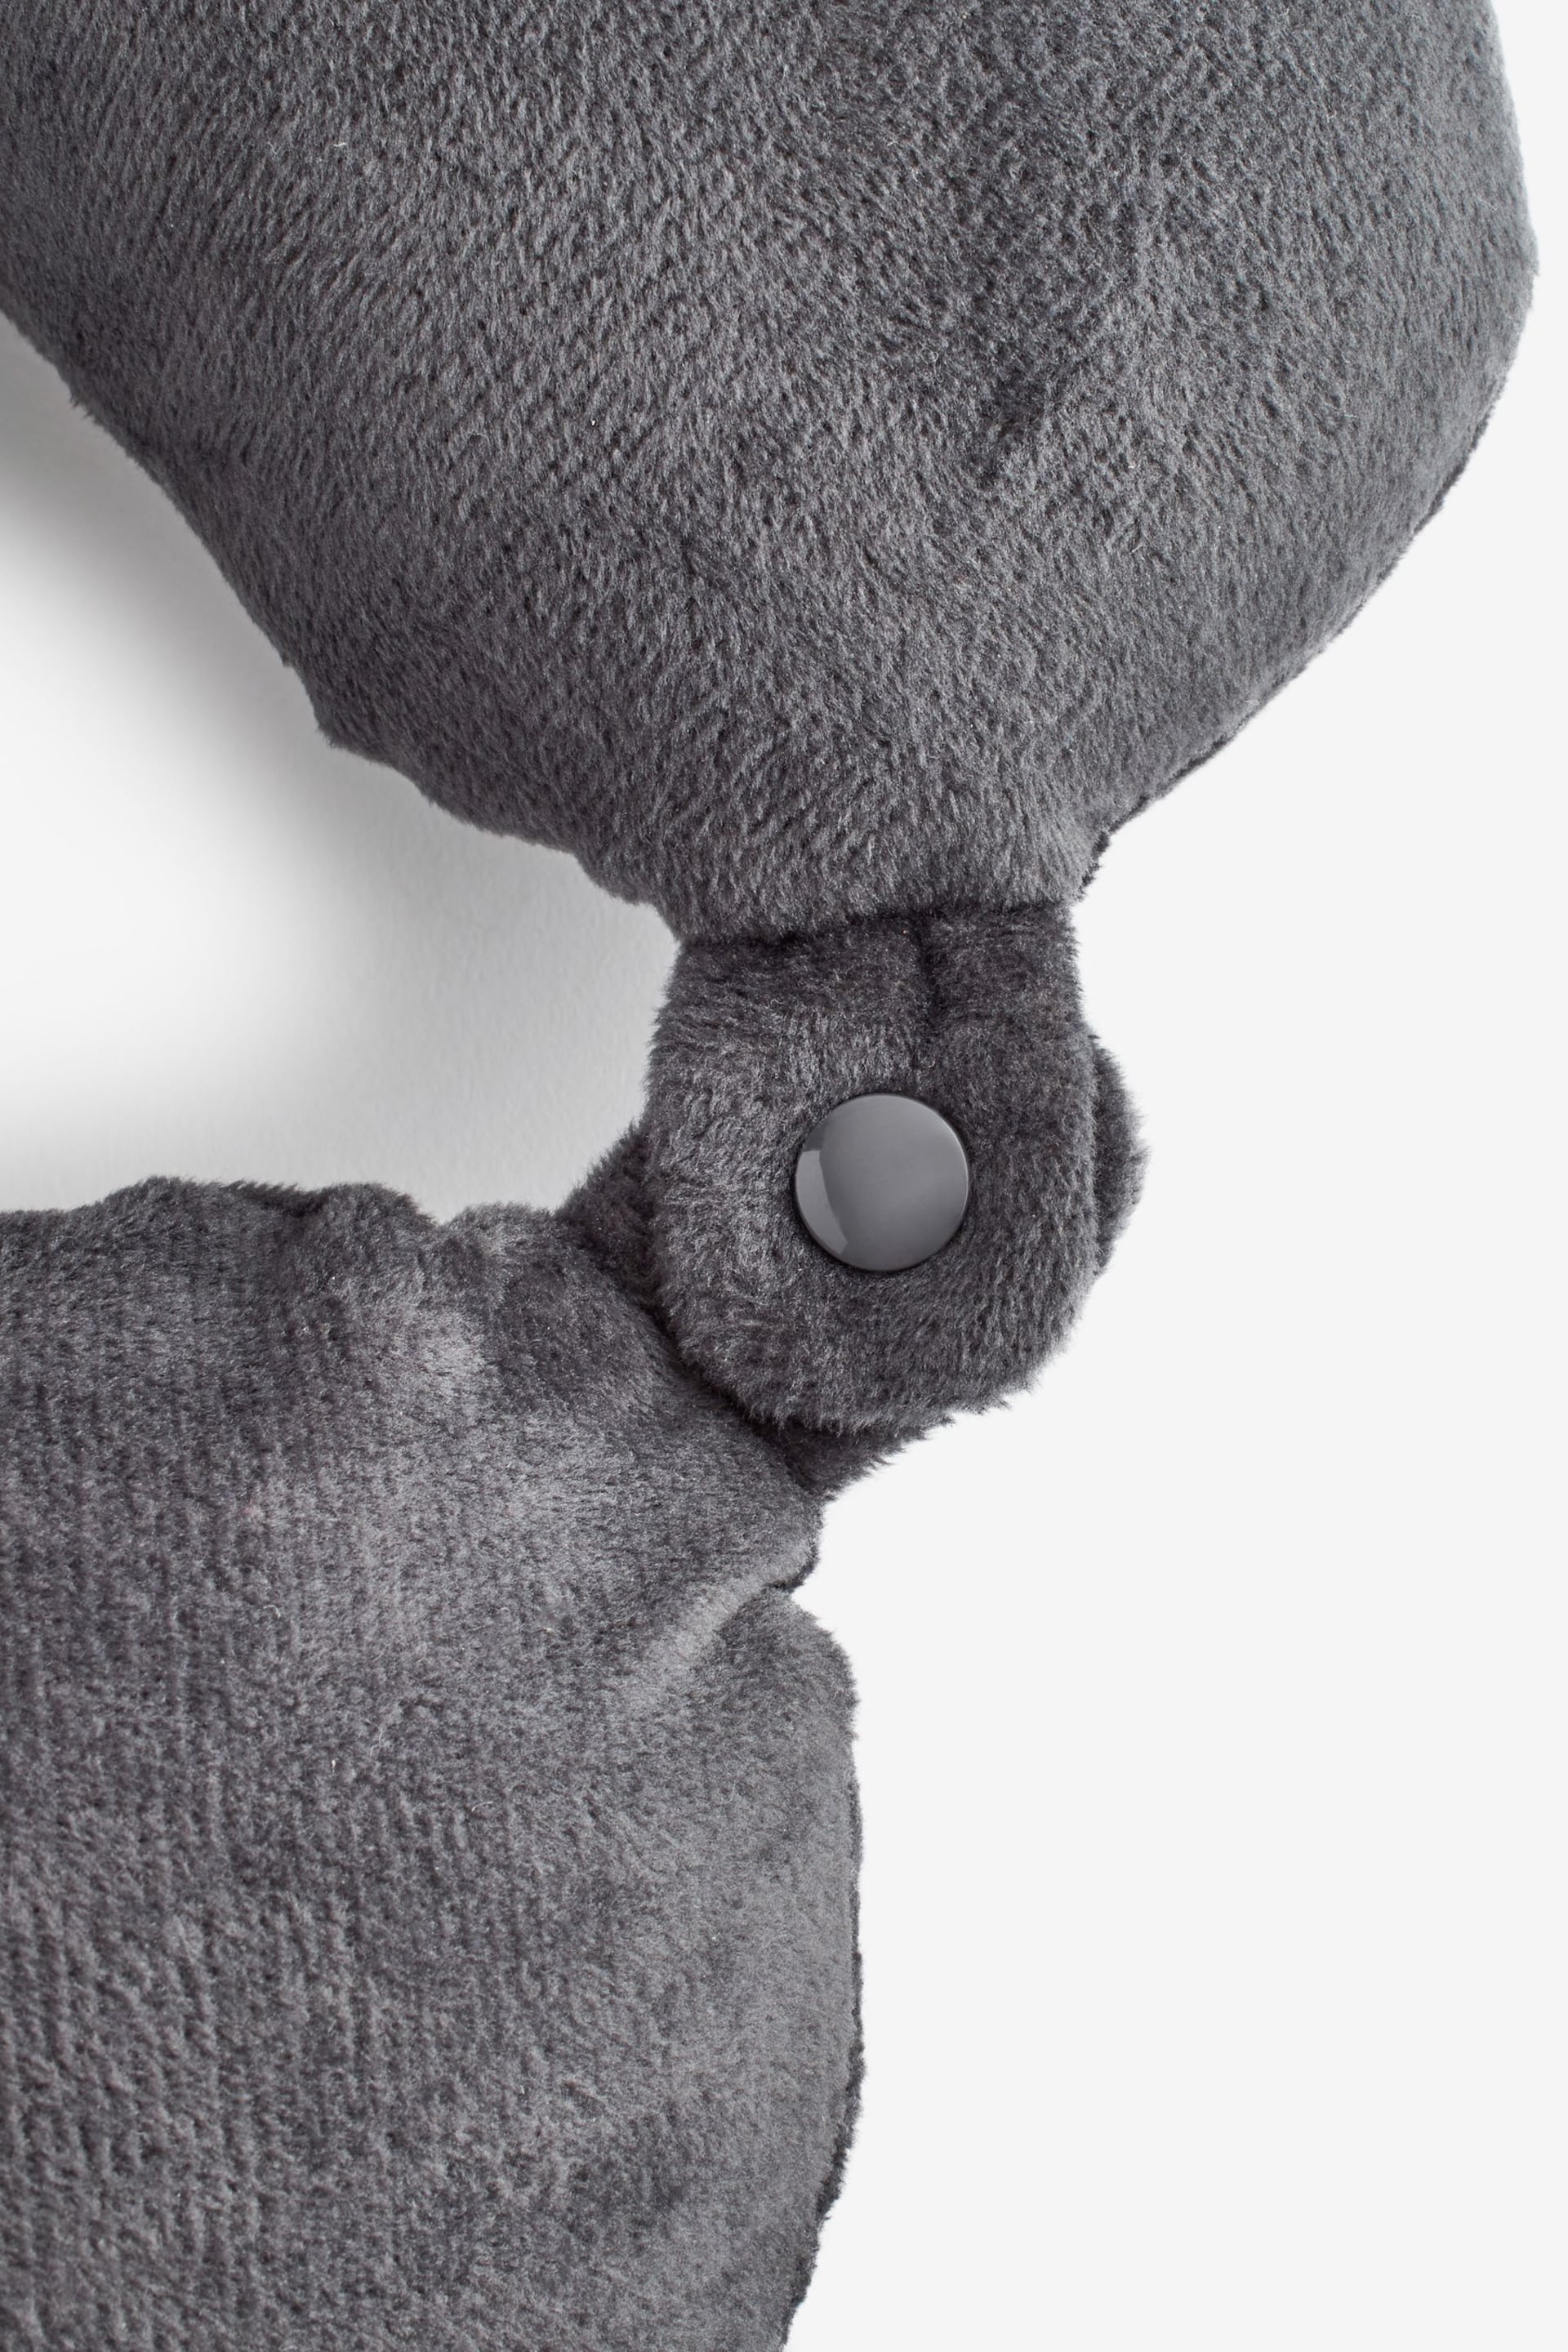 Grey Travel Neck Pillow - Image 3 of 3